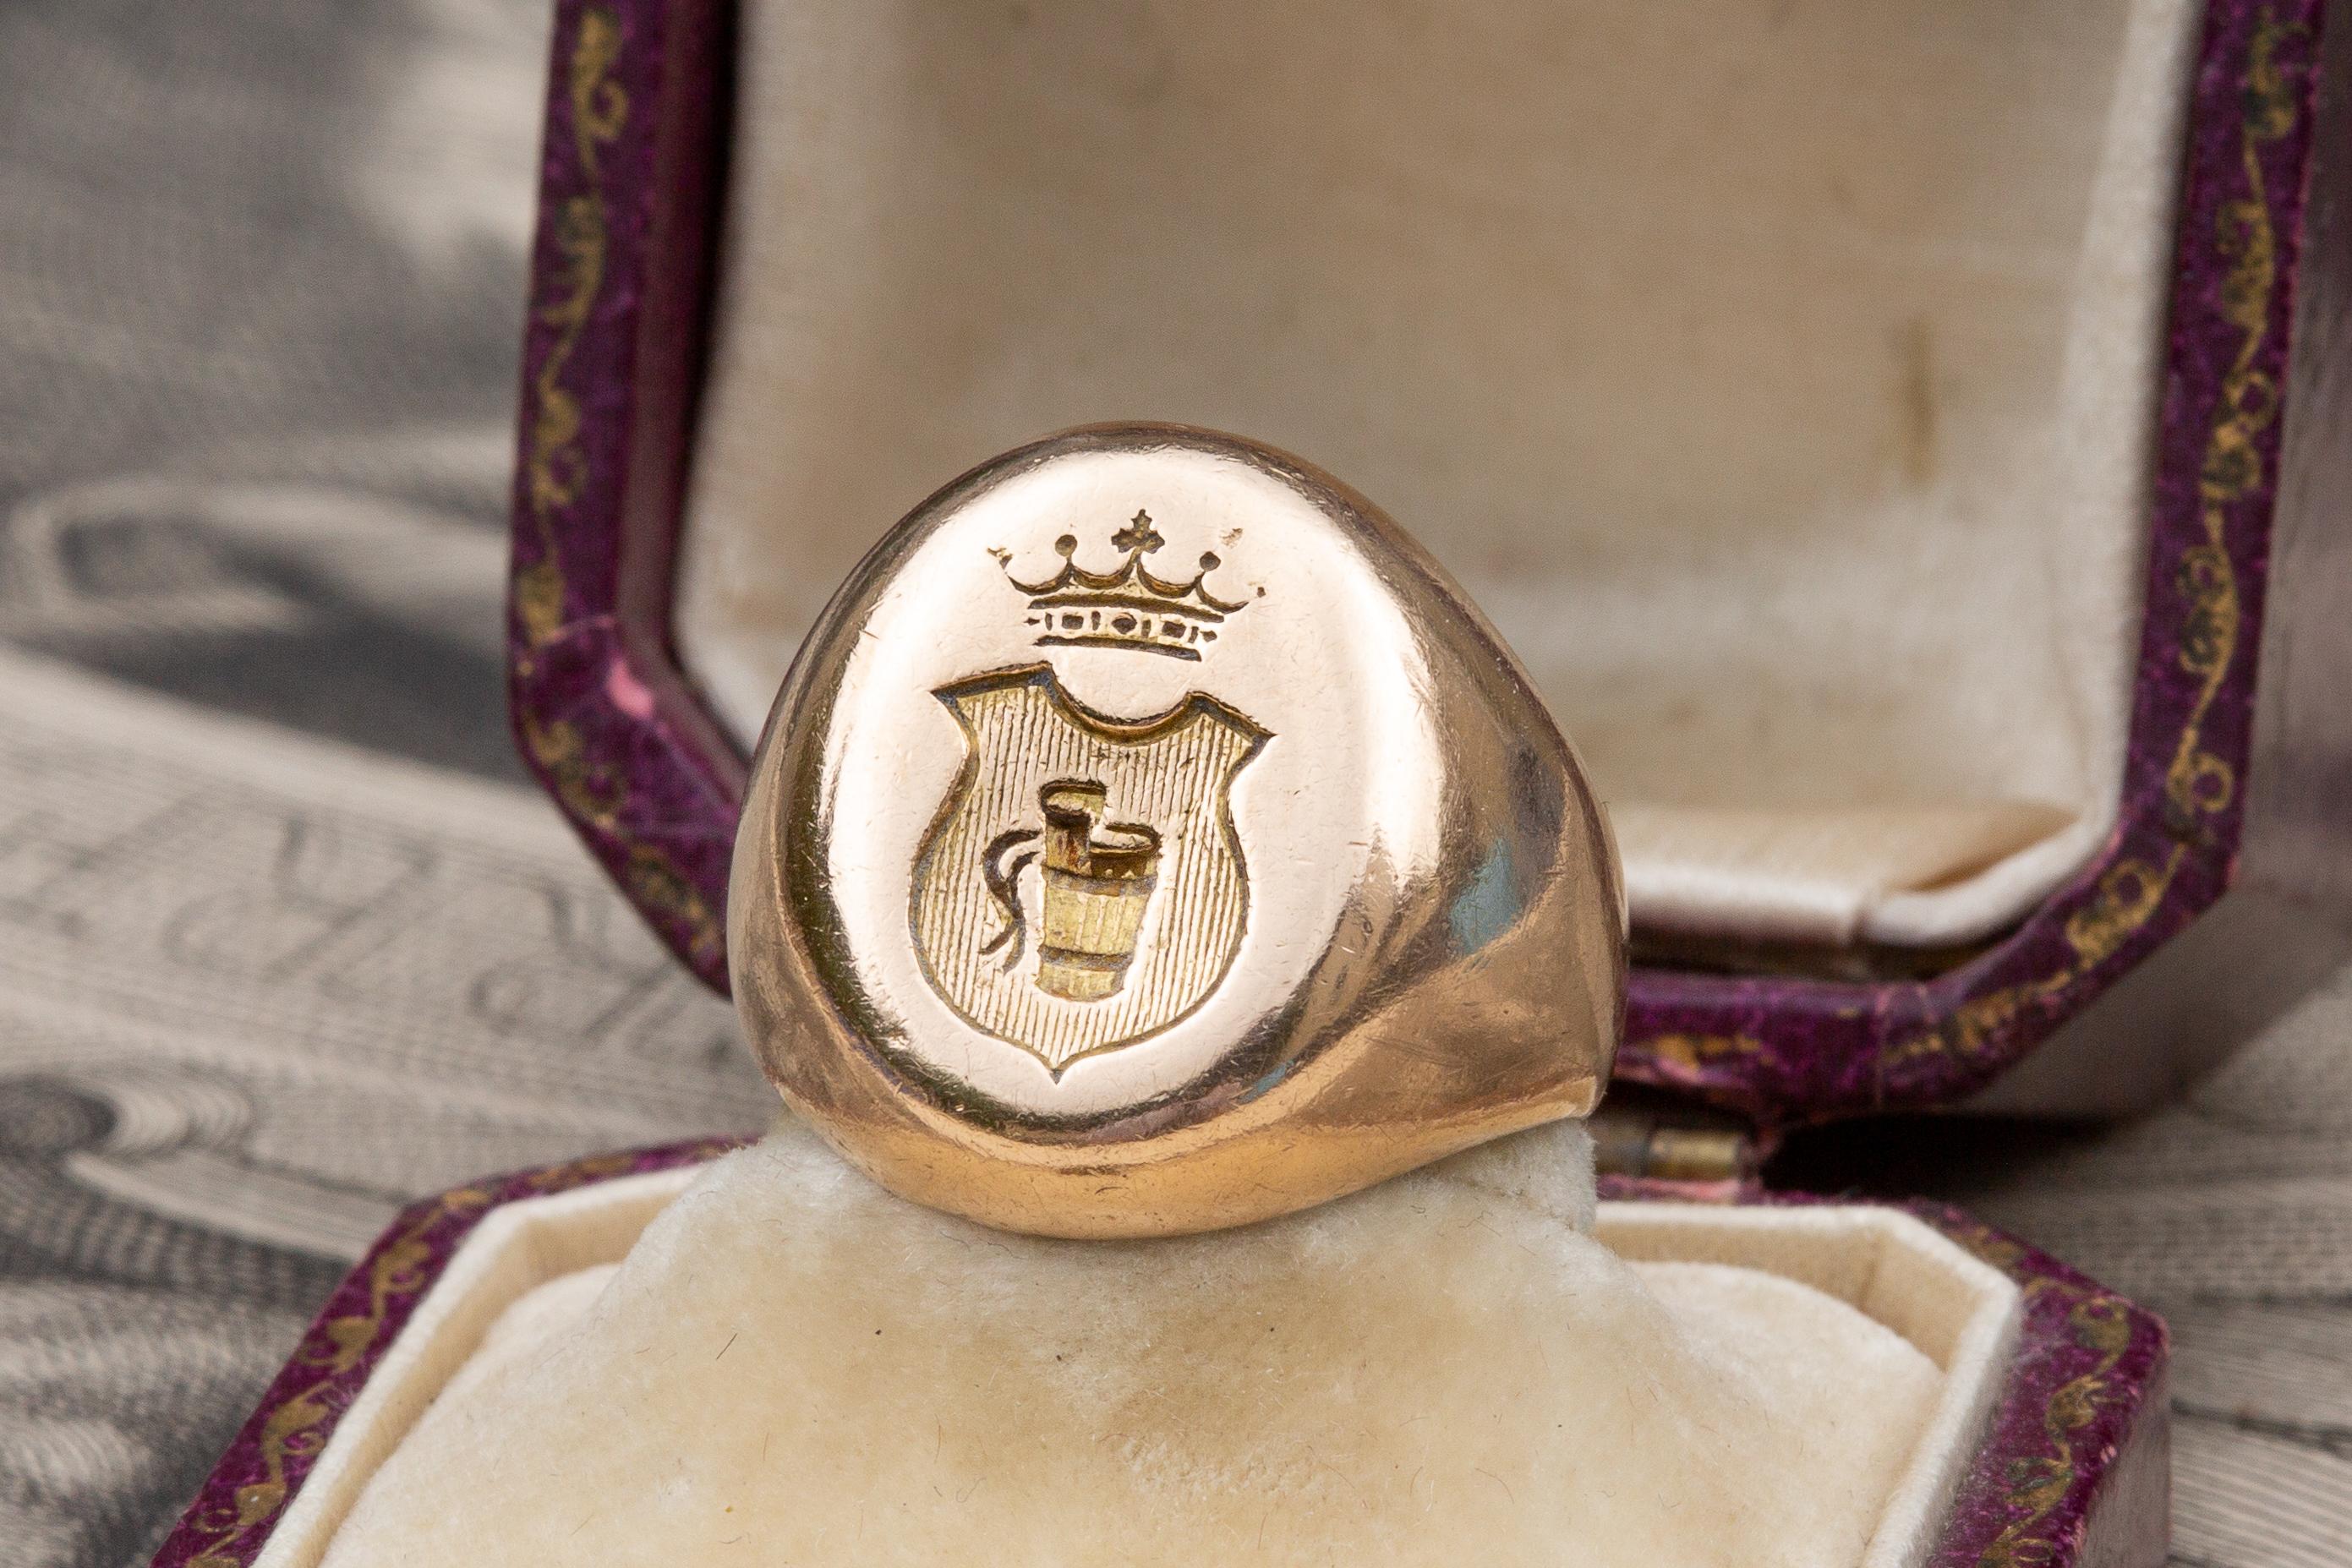 Superb engraved intaglio signet ring made in France dating to the late 19th century. It weighs an impressive 19 grams of 18K gold. The heraldic family coat of arms is intricately carved and in the form of a shield, the specific shape of which is